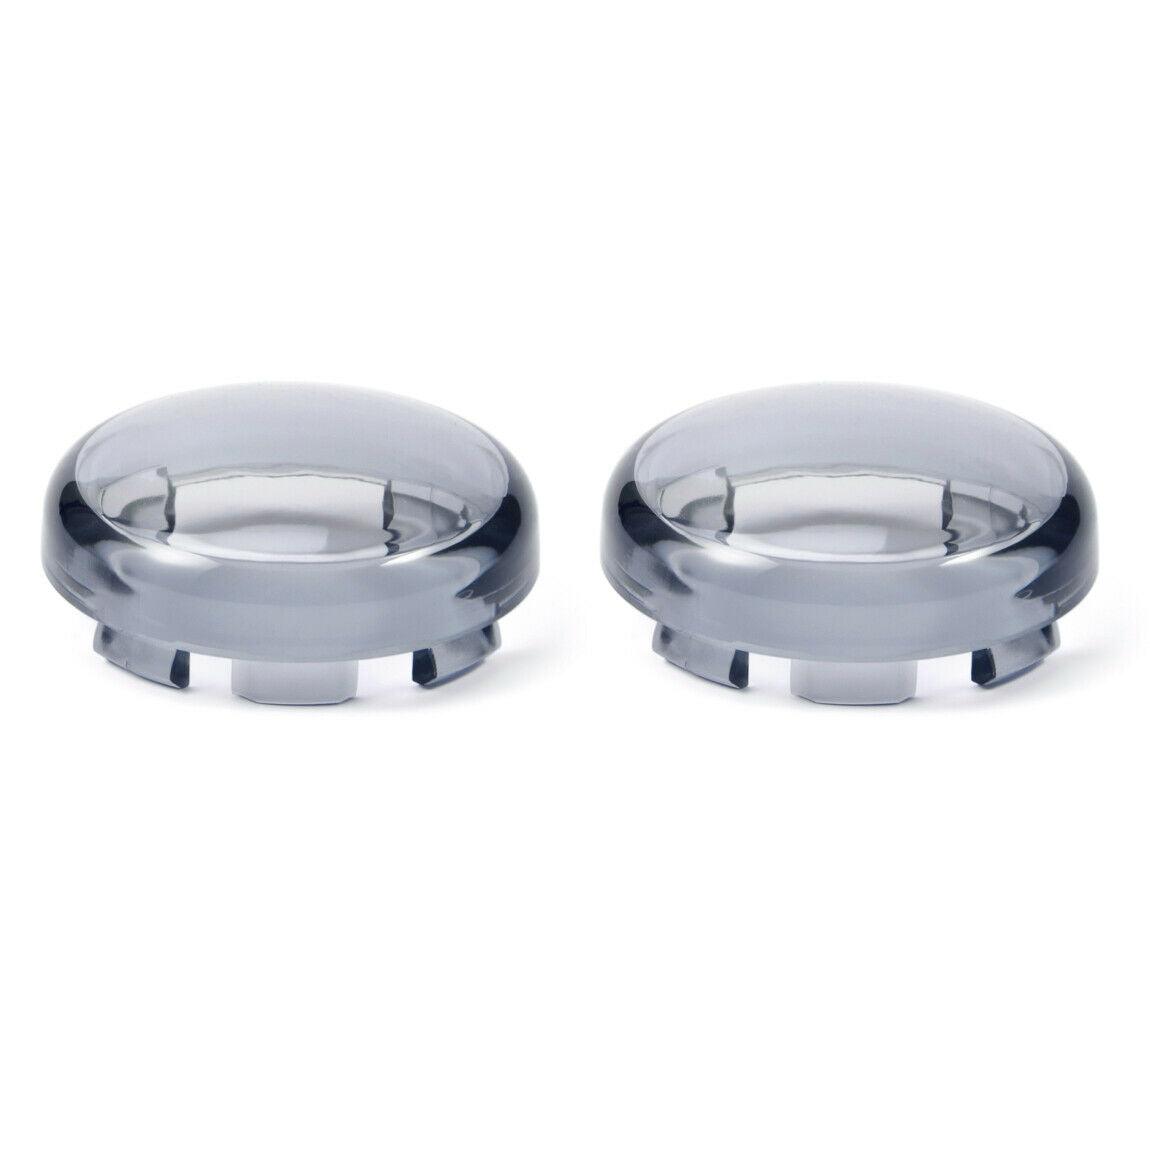 Pair Turn Signal Lens Cover Light Fit for Harley Touring Softail Sportster 1200 - Moto Life Products